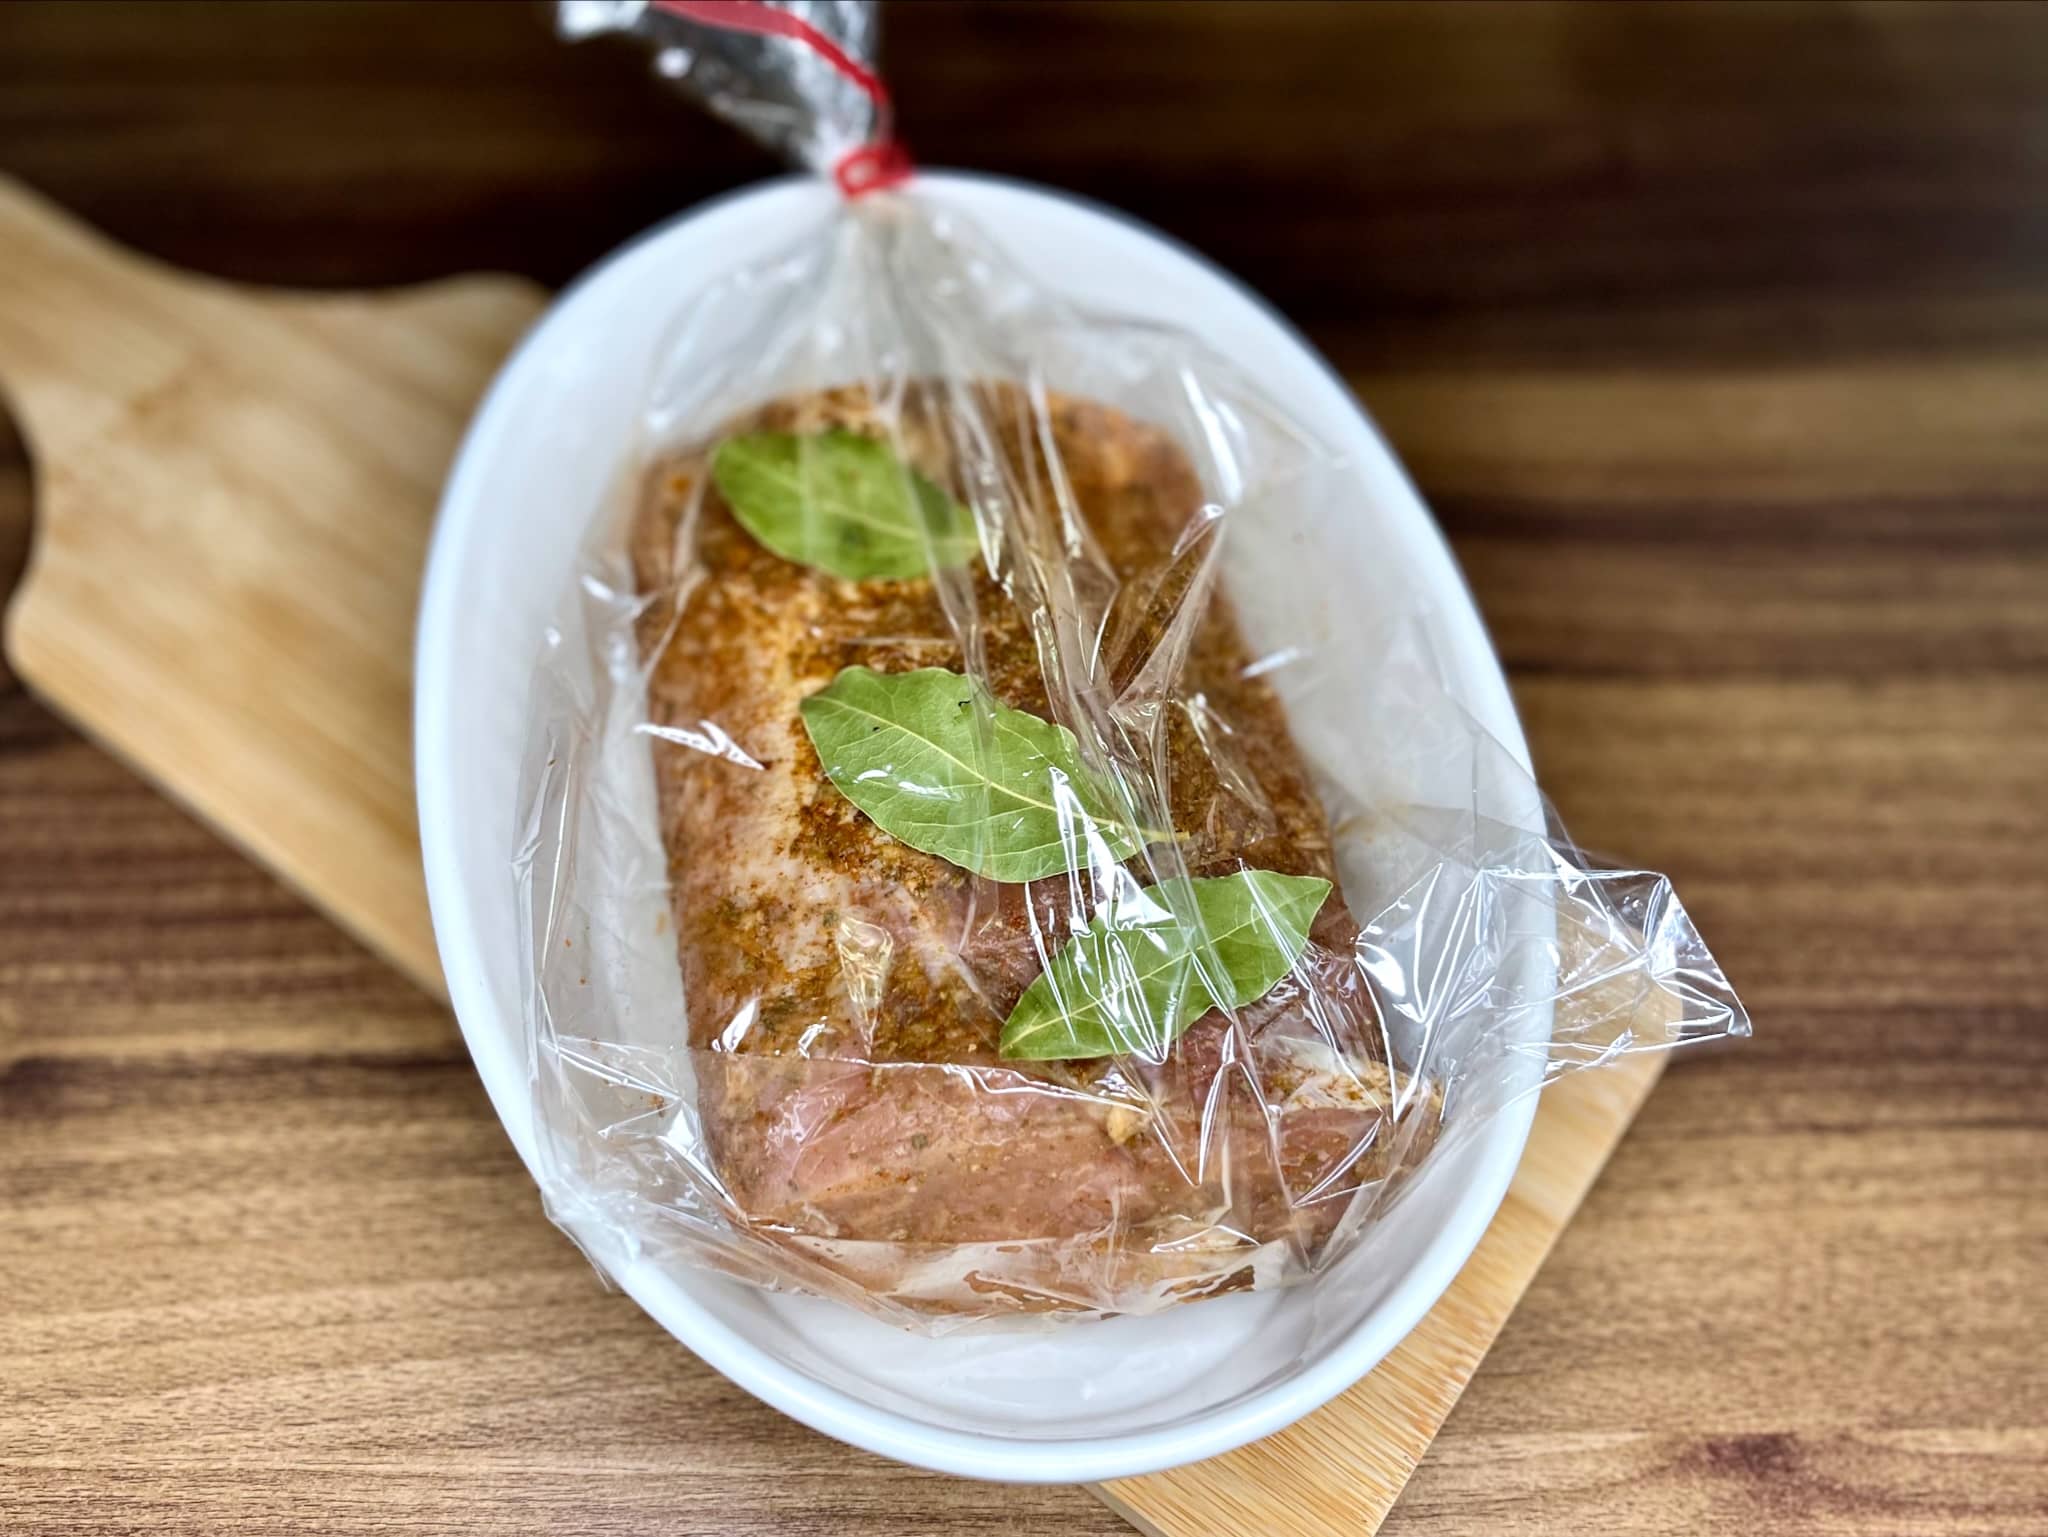 Pork loin packed in bag ready for baking